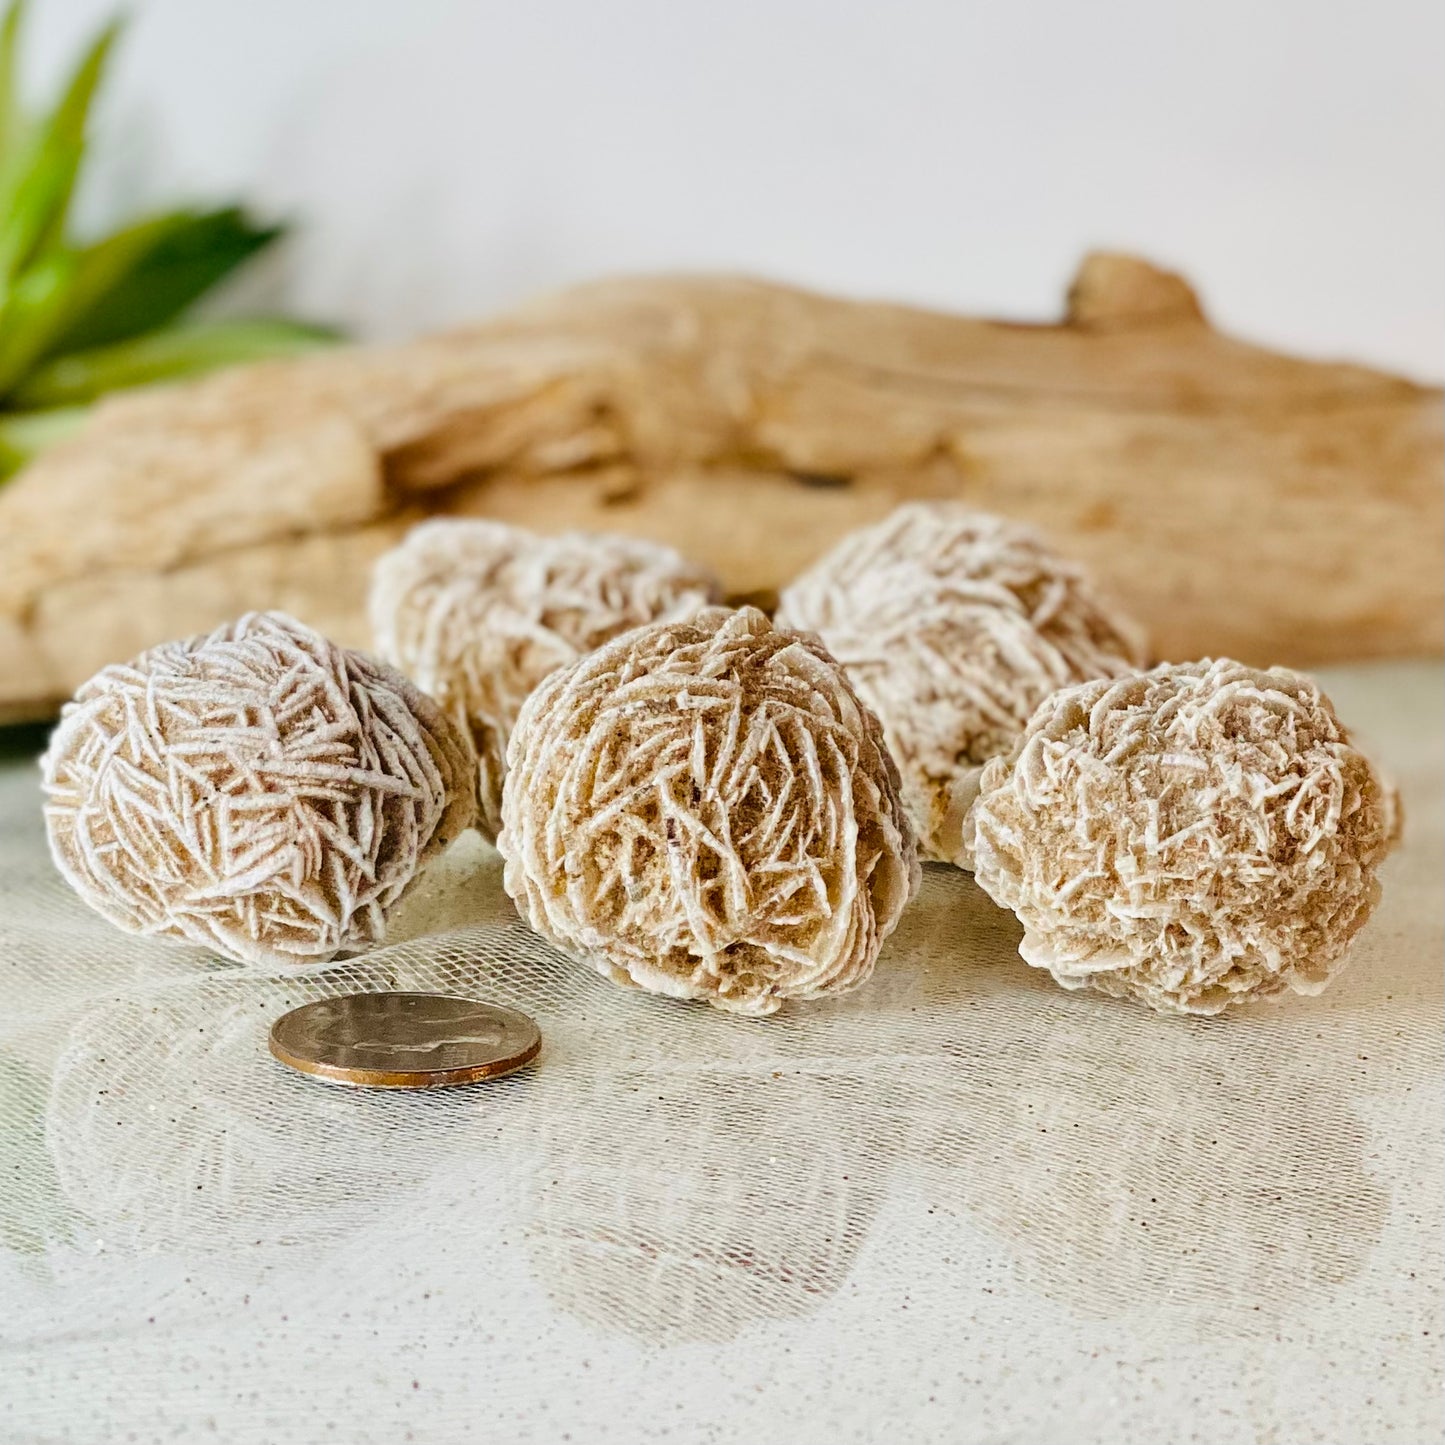 Desert Rose Raw Stone - Natural Beauty and Earthly Energies for Grounding!